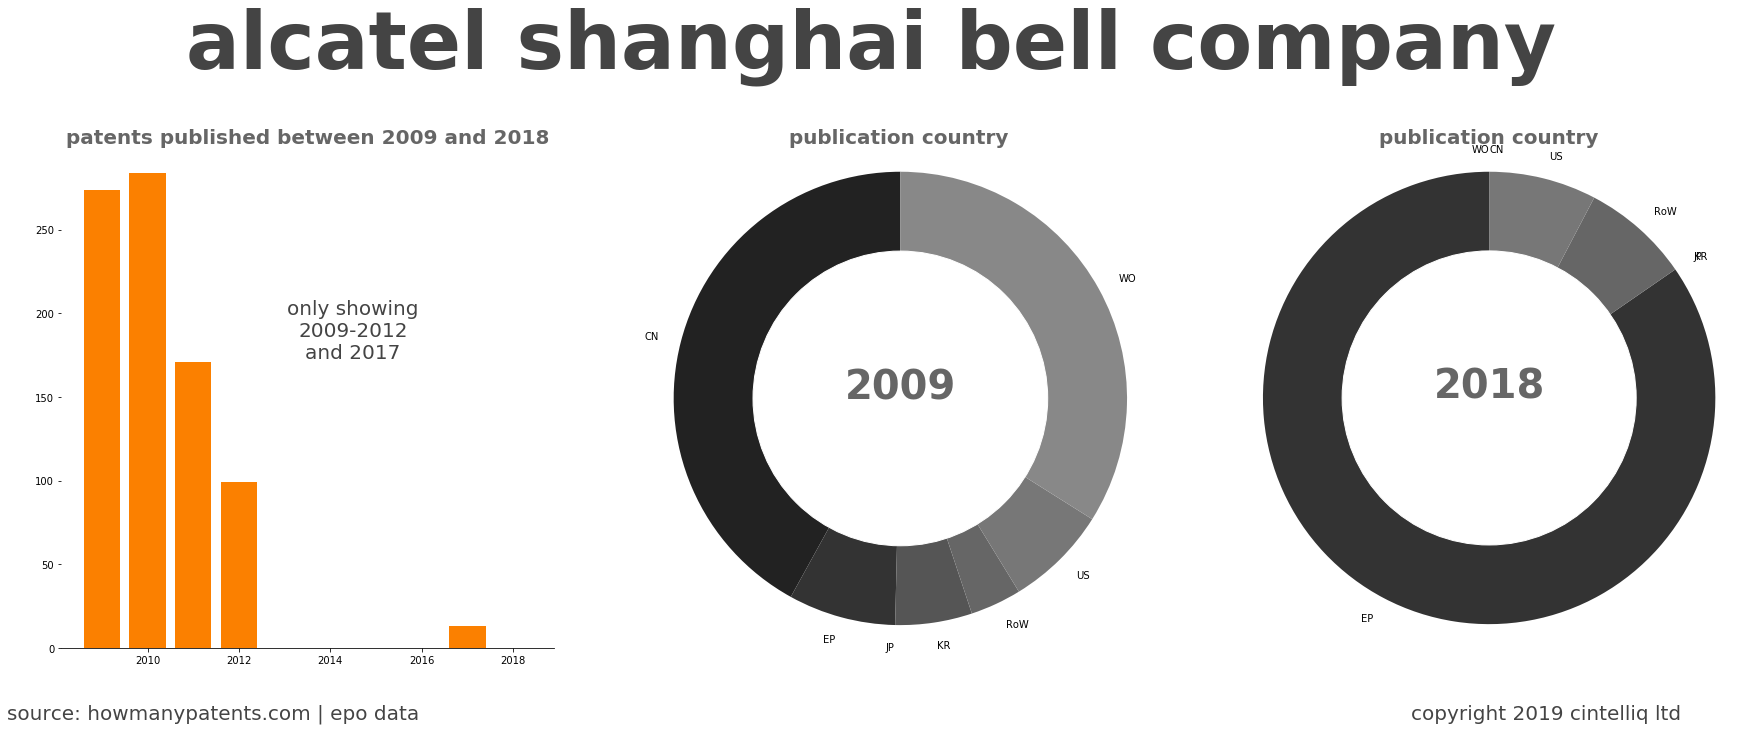 summary of patents for Alcatel Shanghai Bell Company